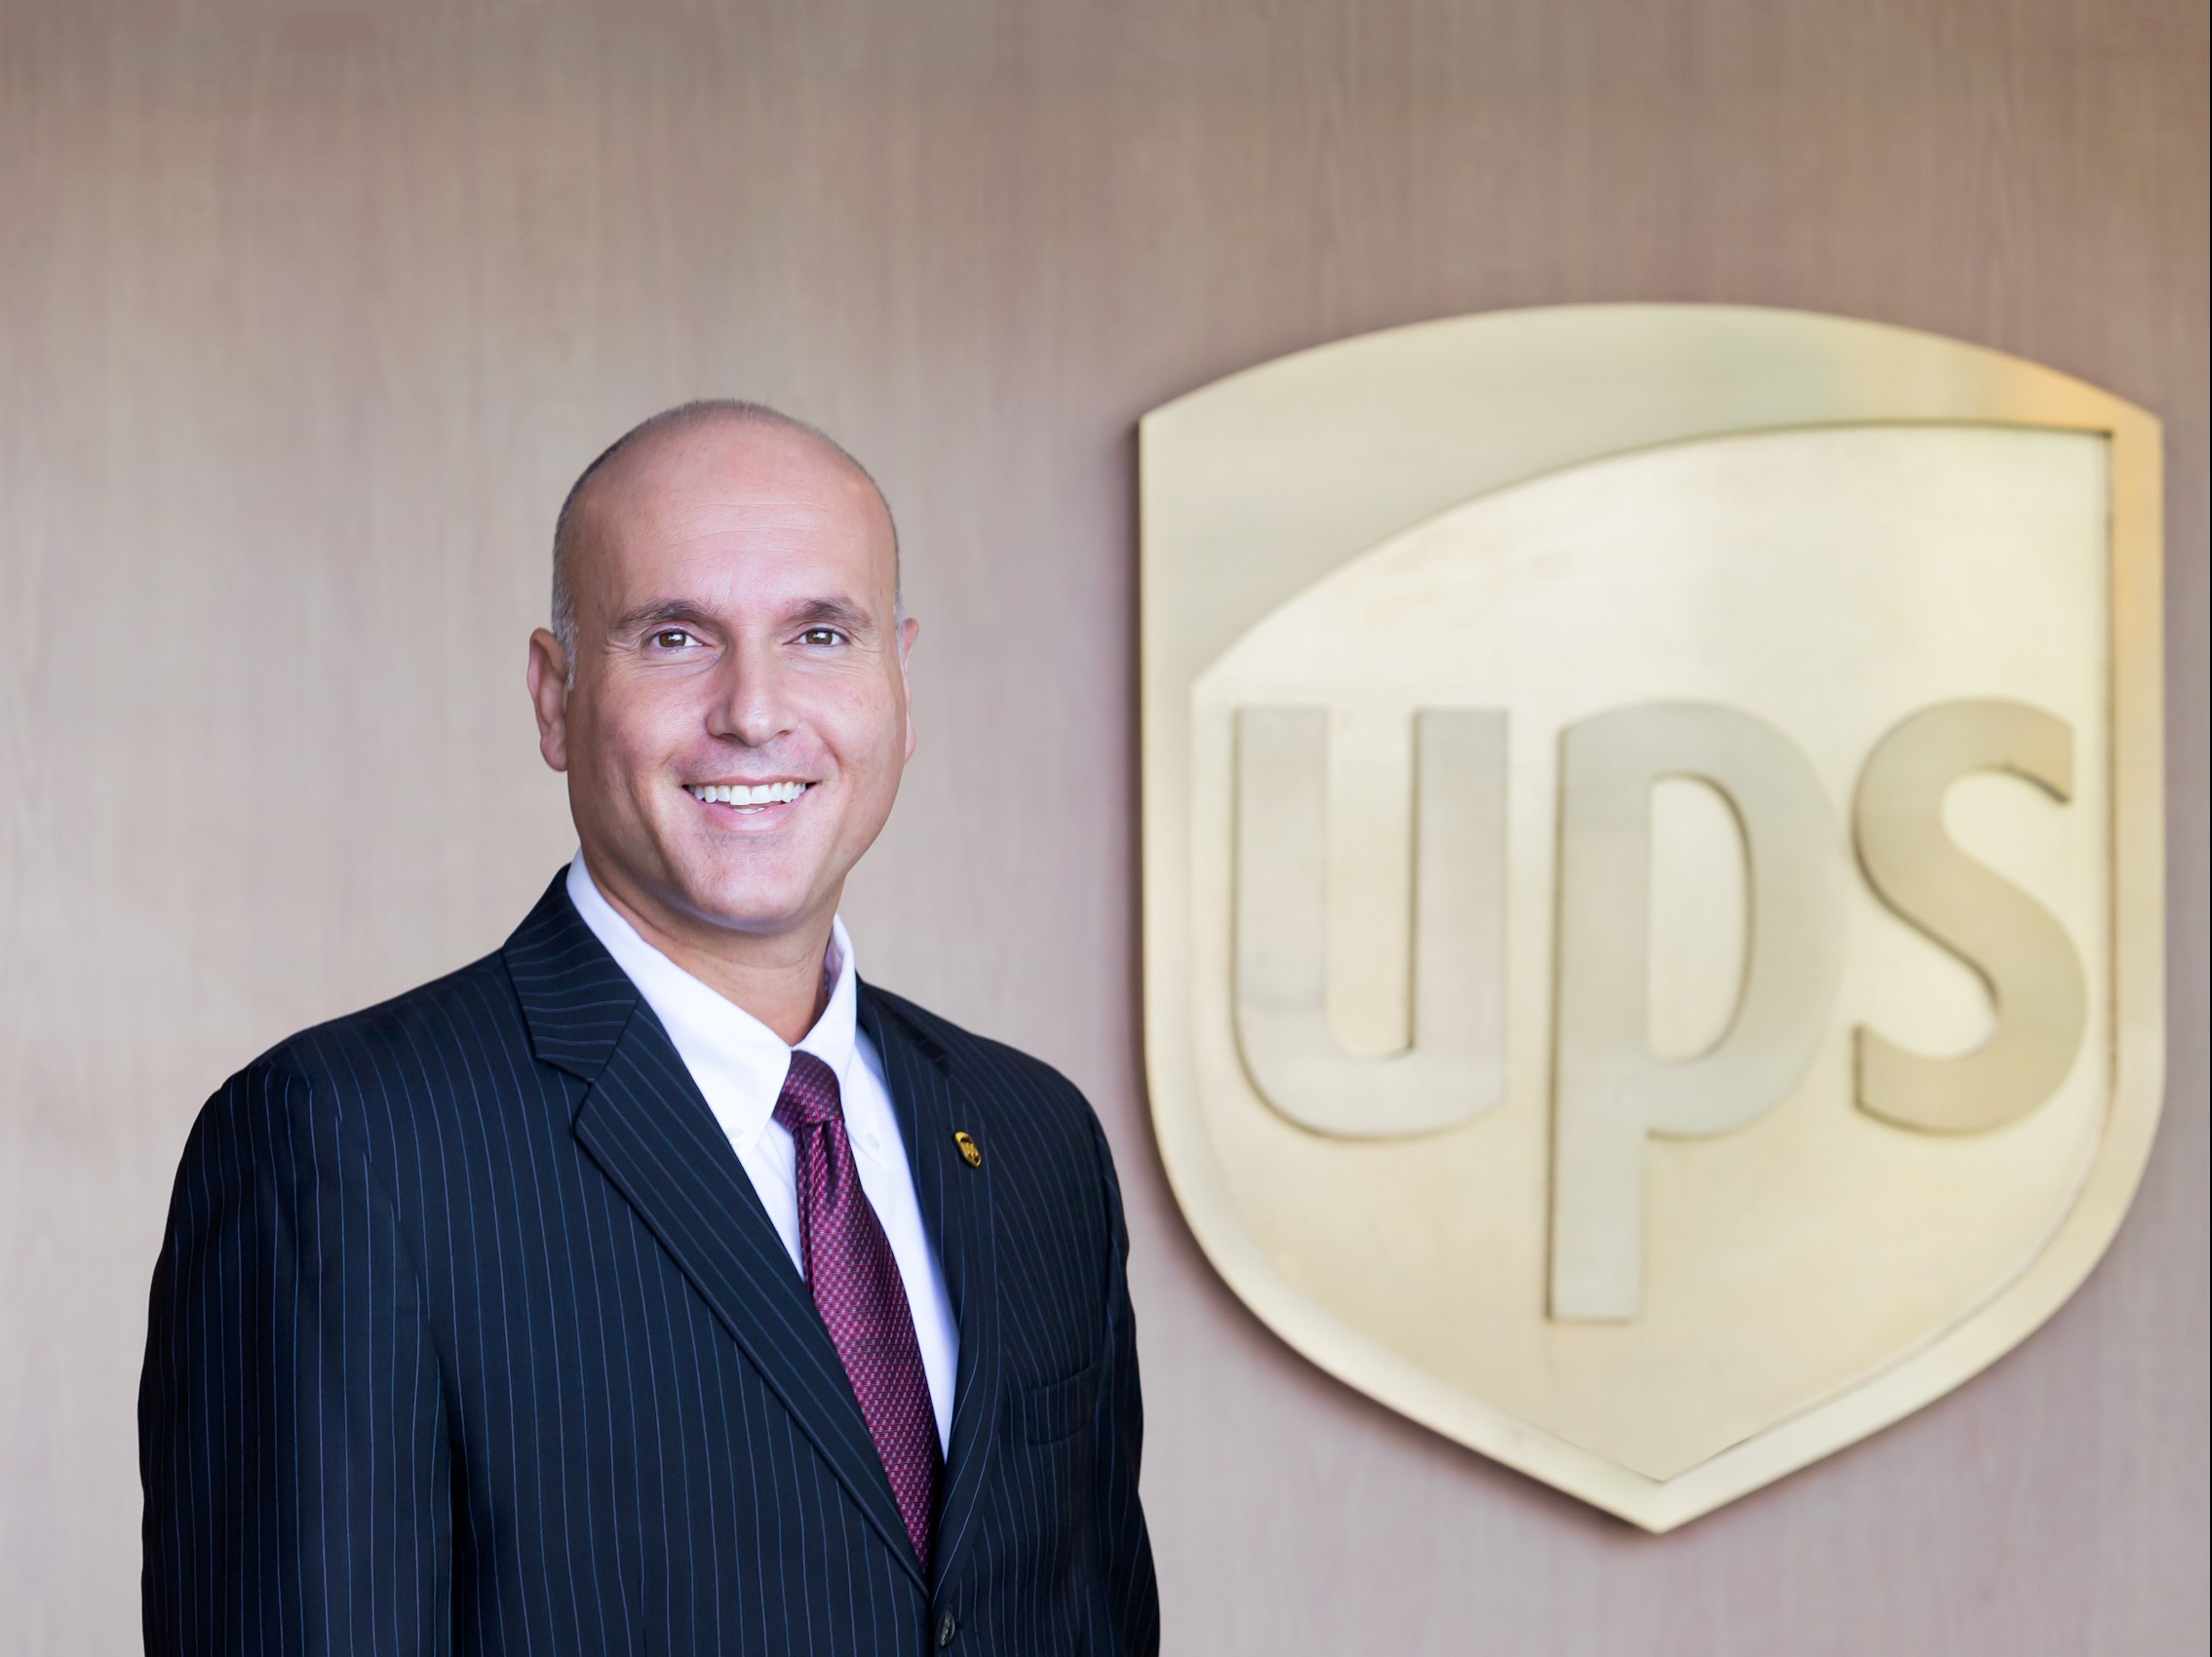 Nando Cesarone is the new president of UPS Europe Region